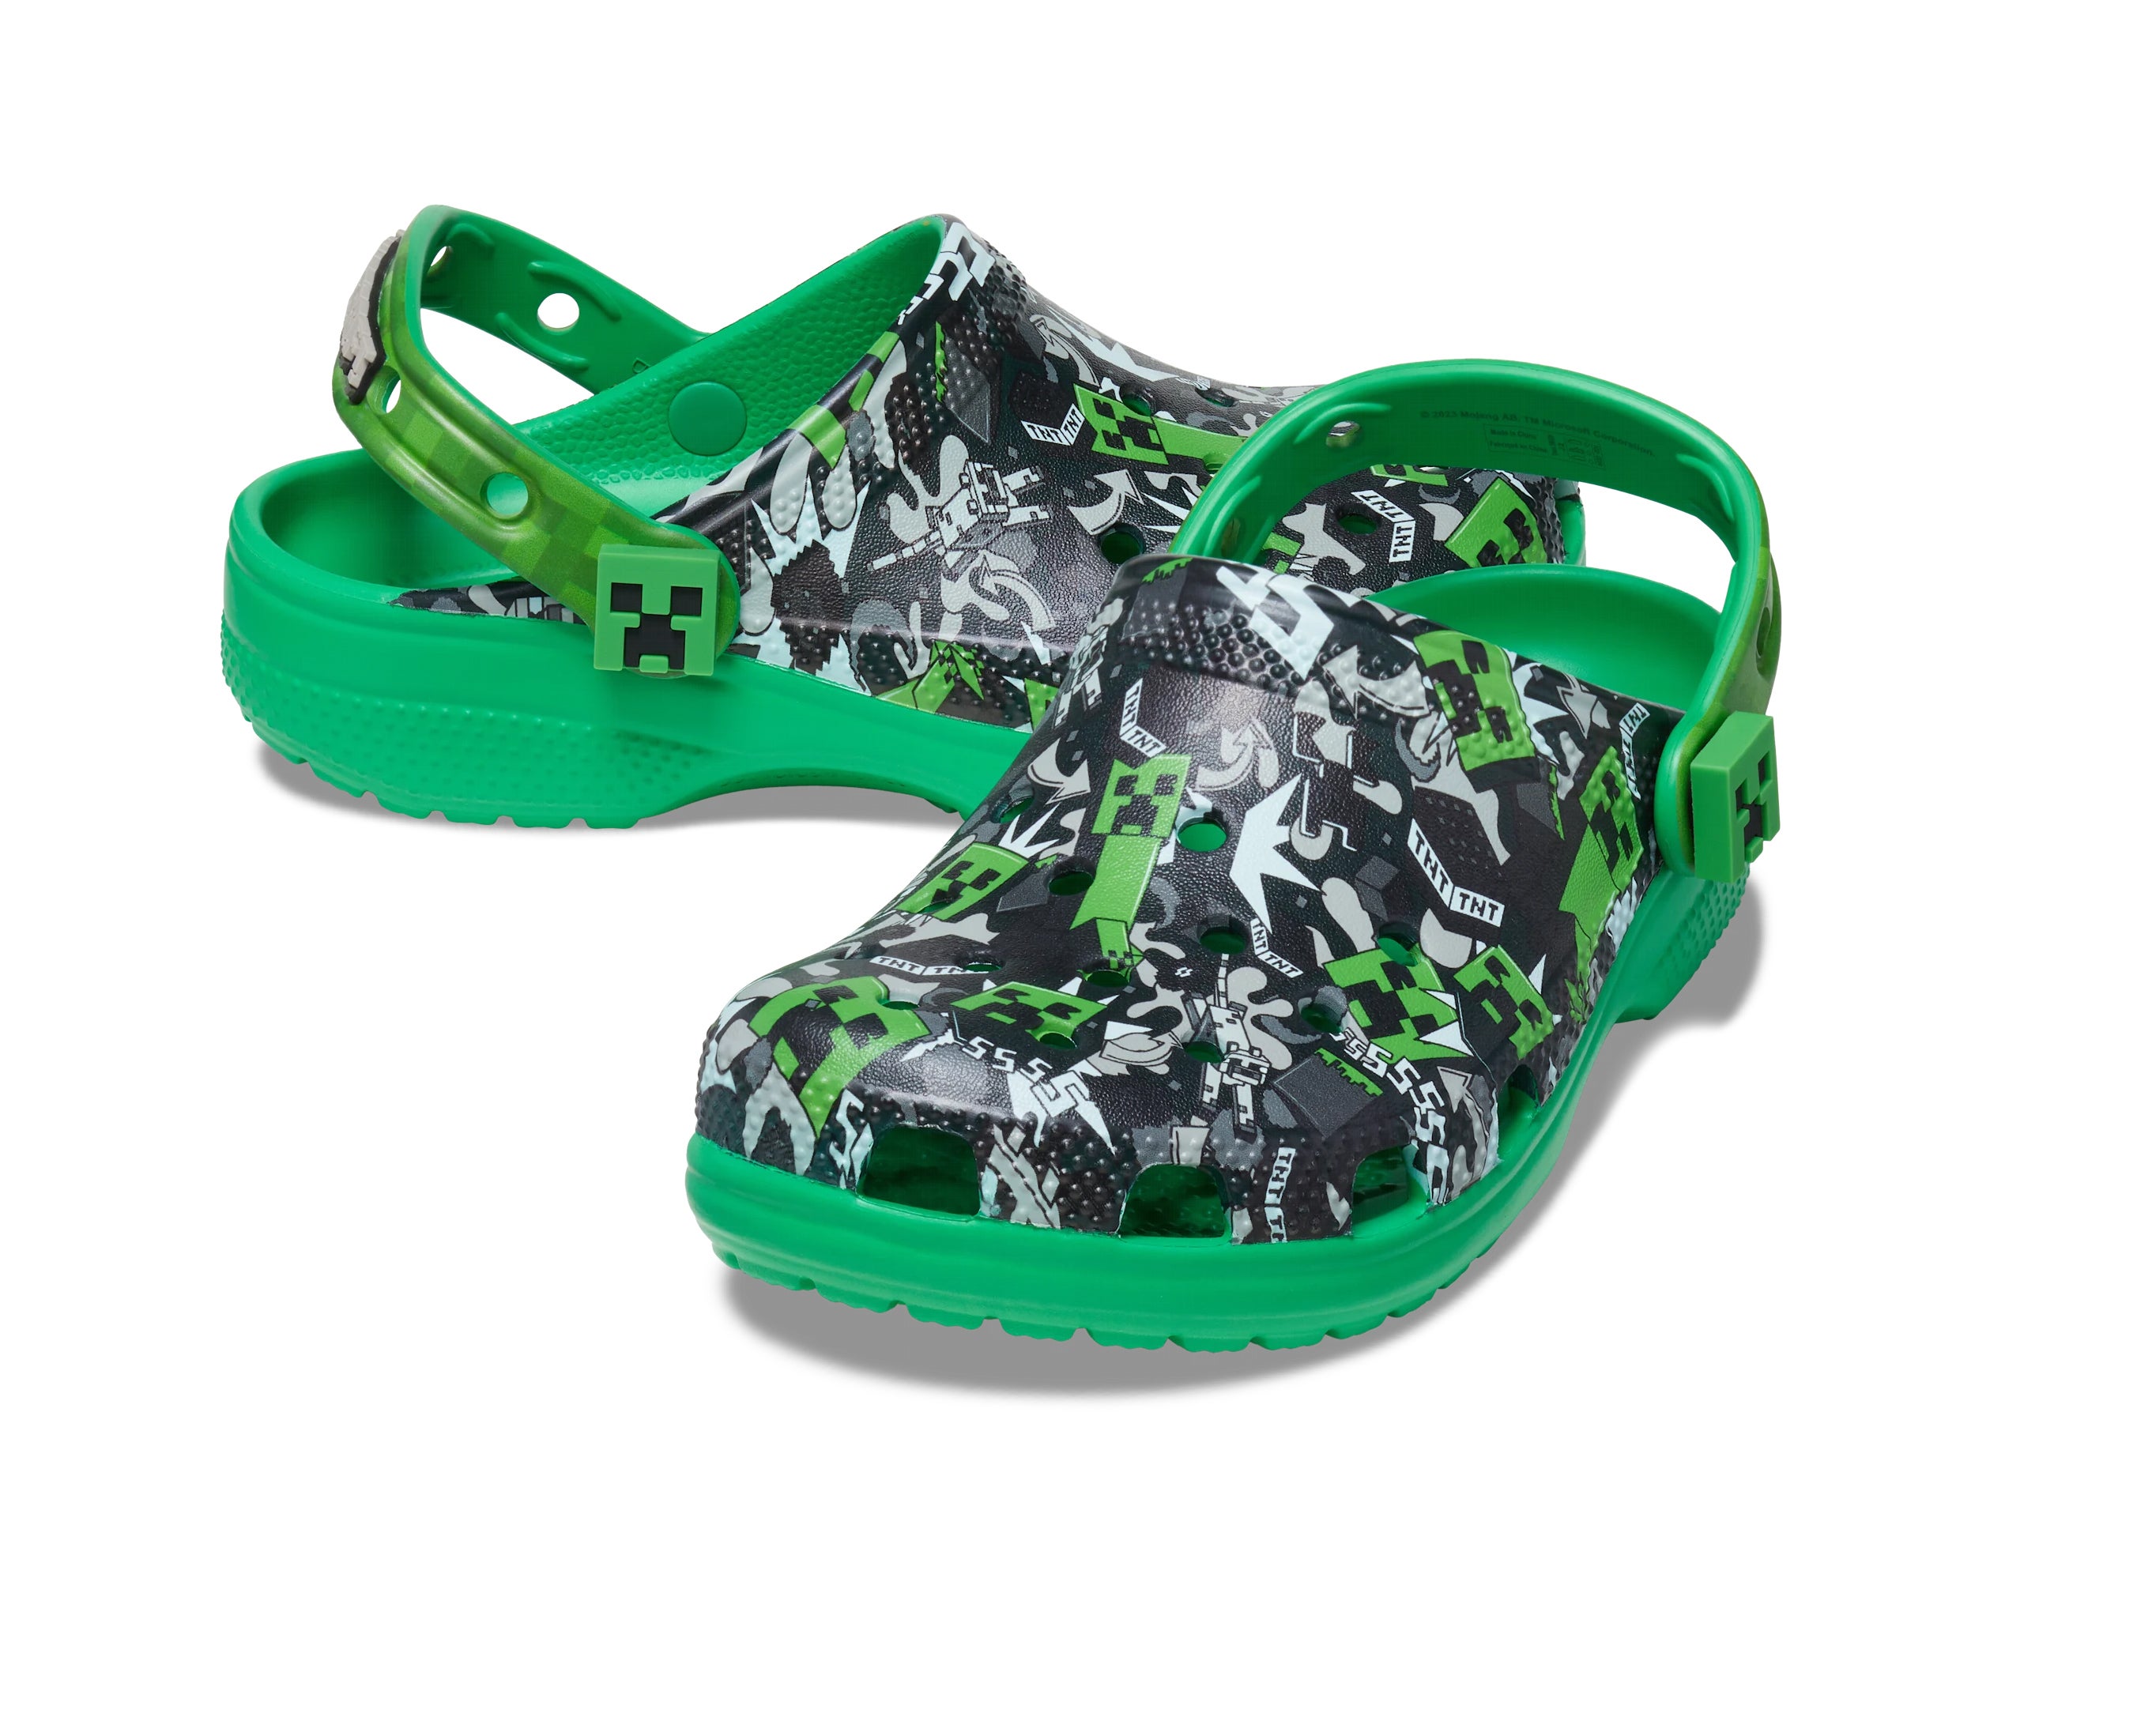 The Minecraft Crocs are so gloriously ugly, we're in love with